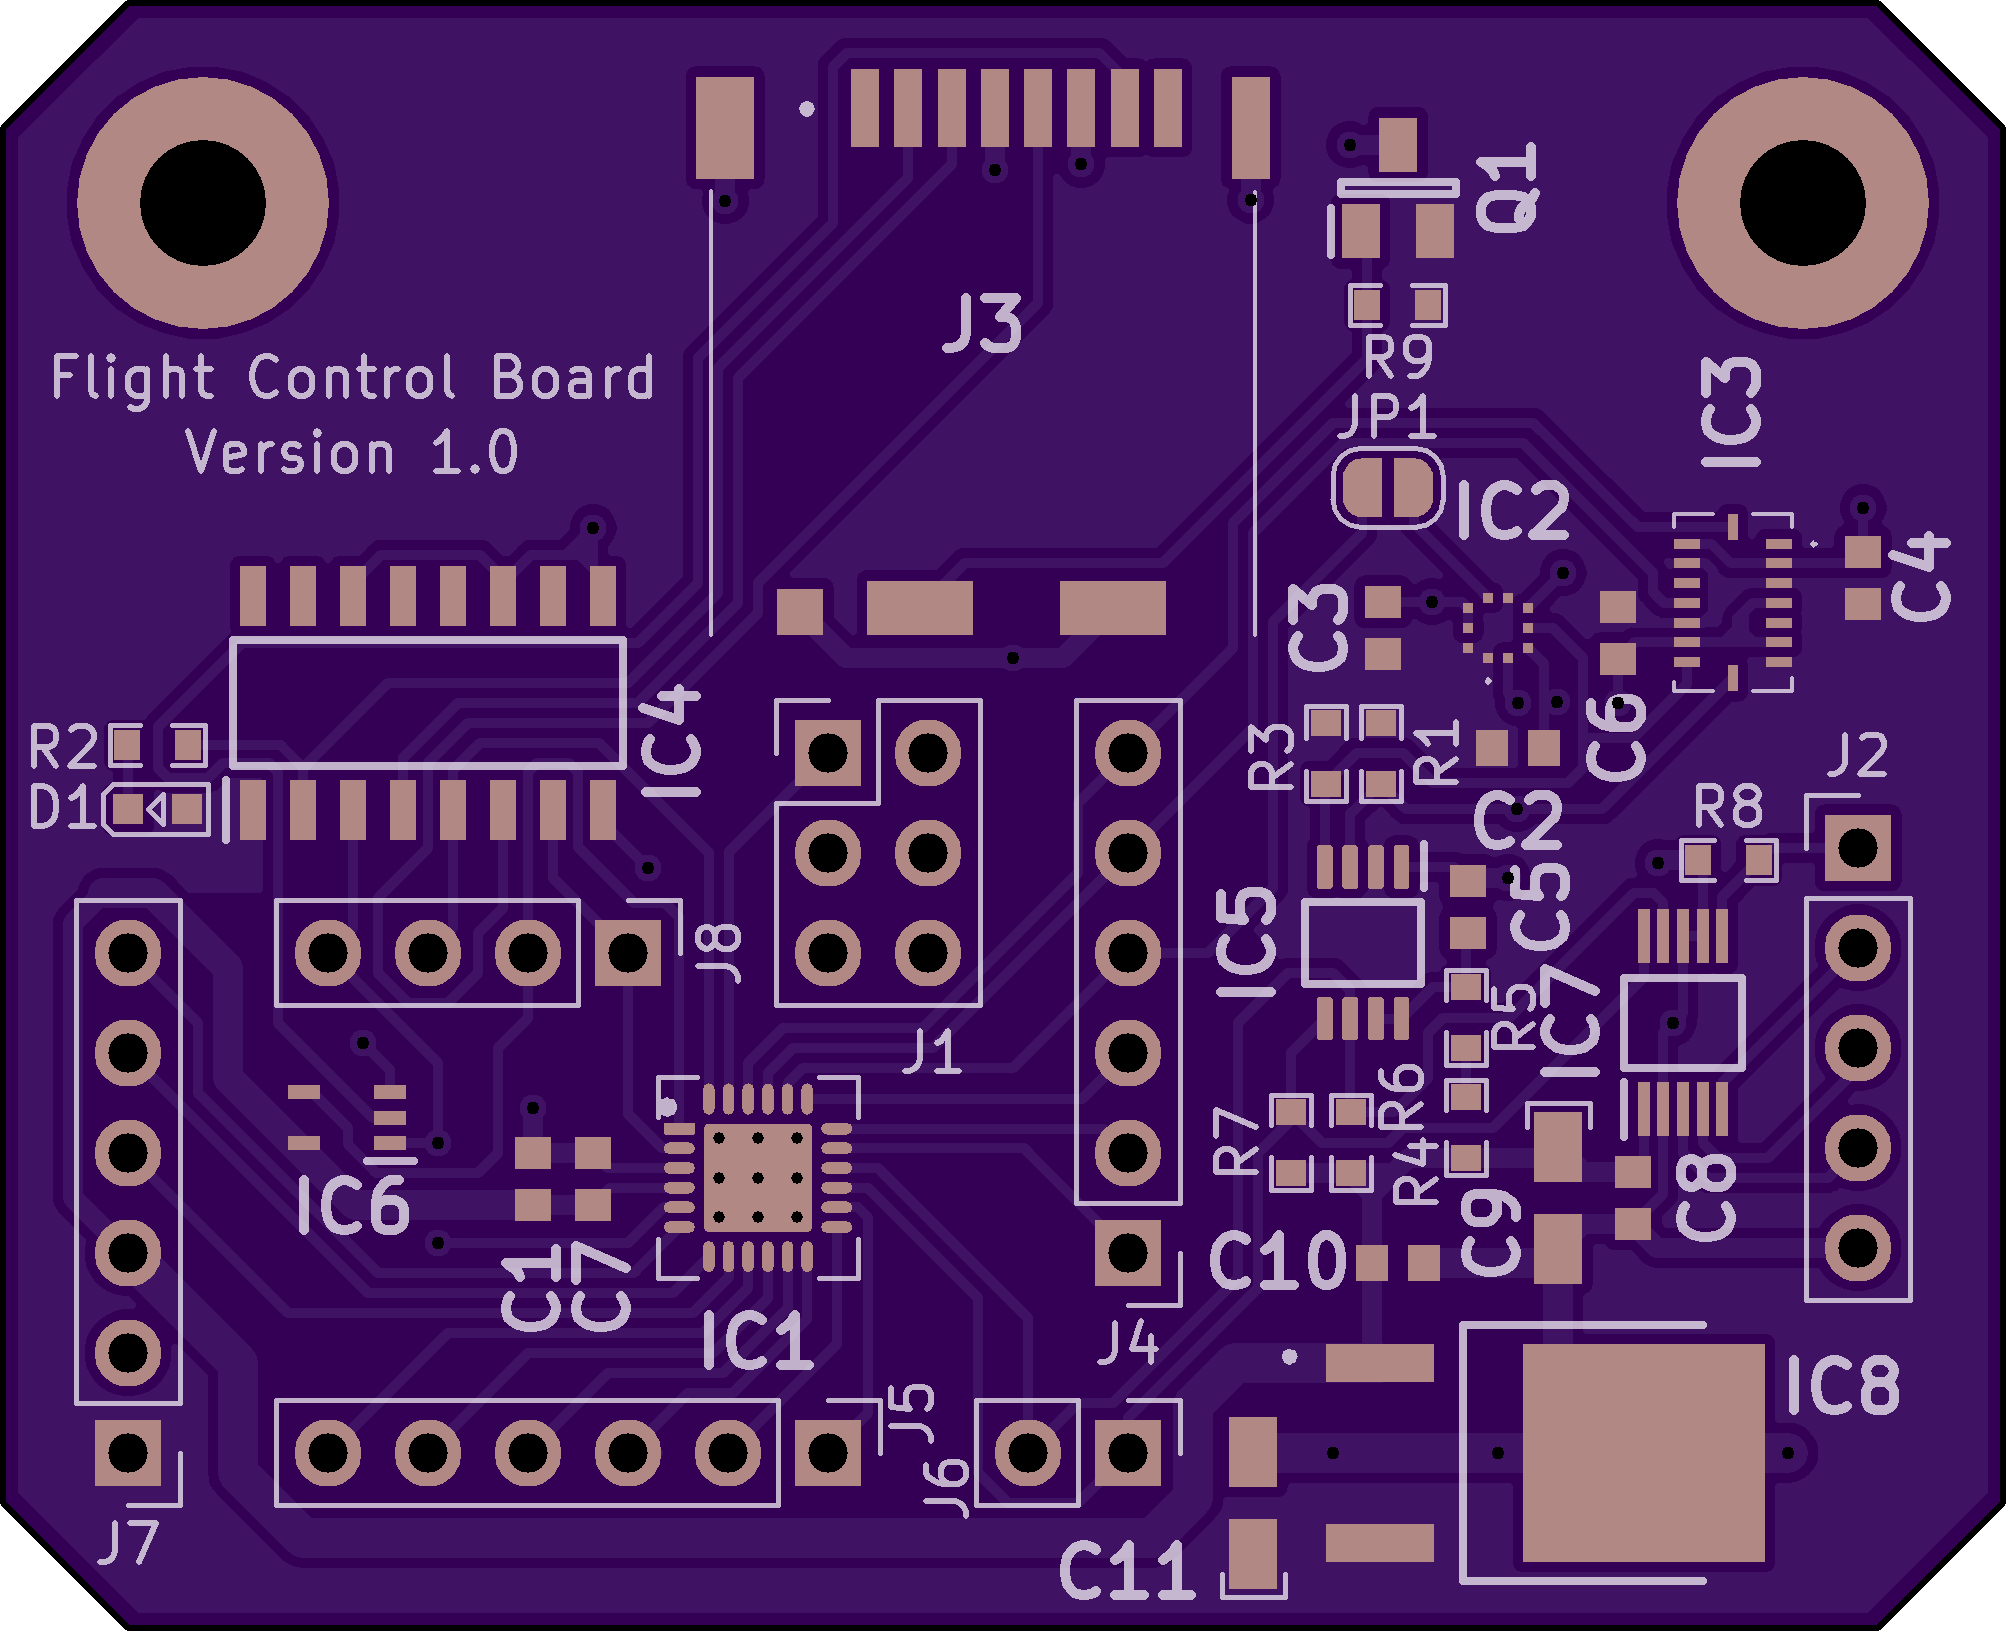 The front of the PCB I designed